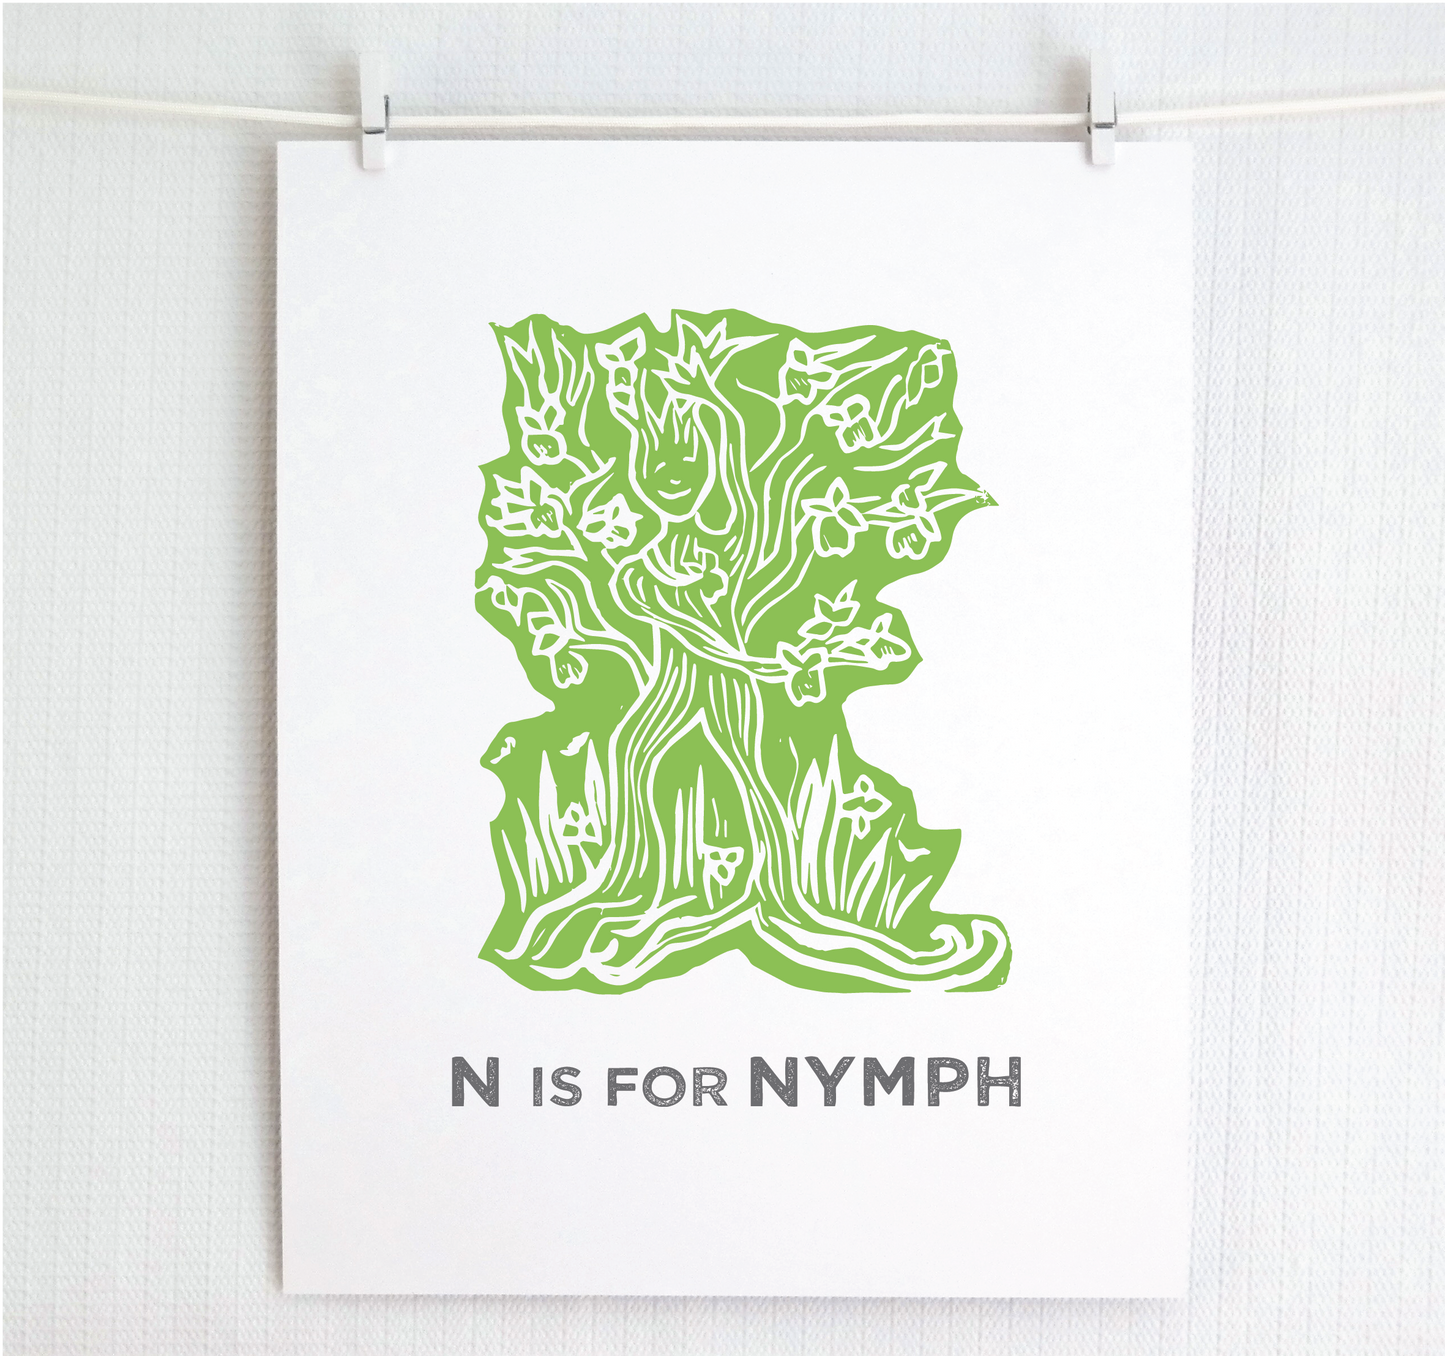 N is for Nymph